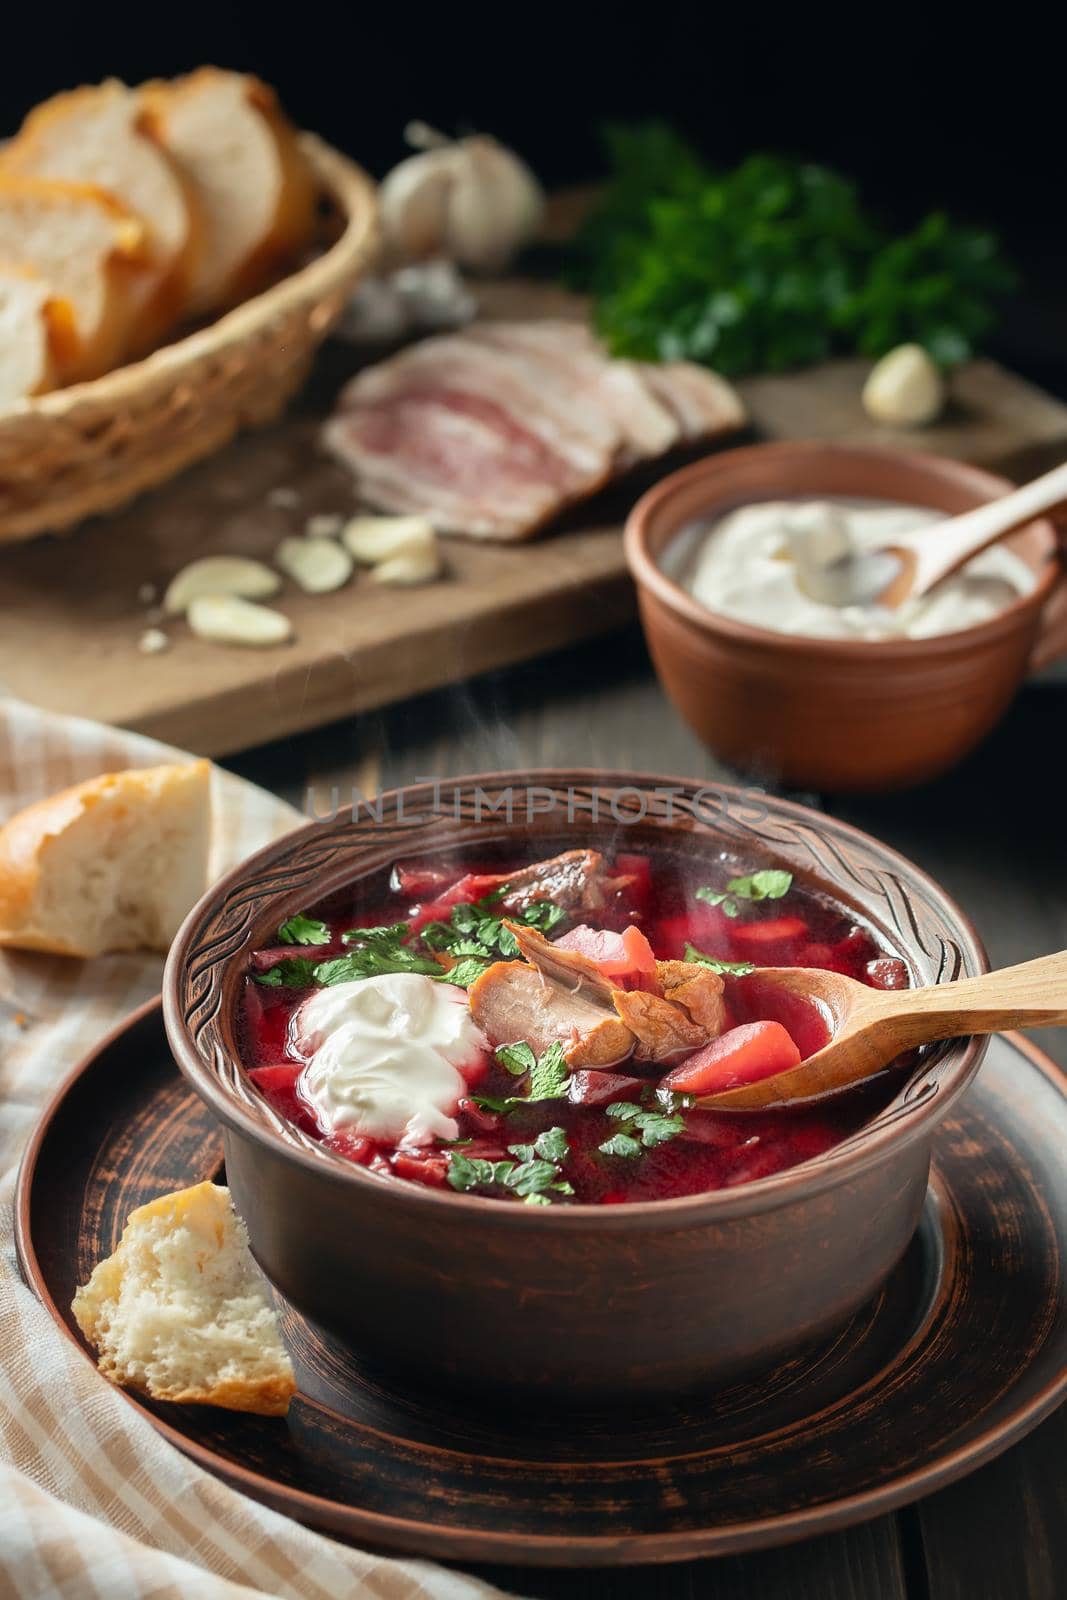 Freshly cooked borscht - traditional dish of Russian and Ukrainian cuisine in earthenware dish with bacon, sour cream and garlic, vertical image by galsand